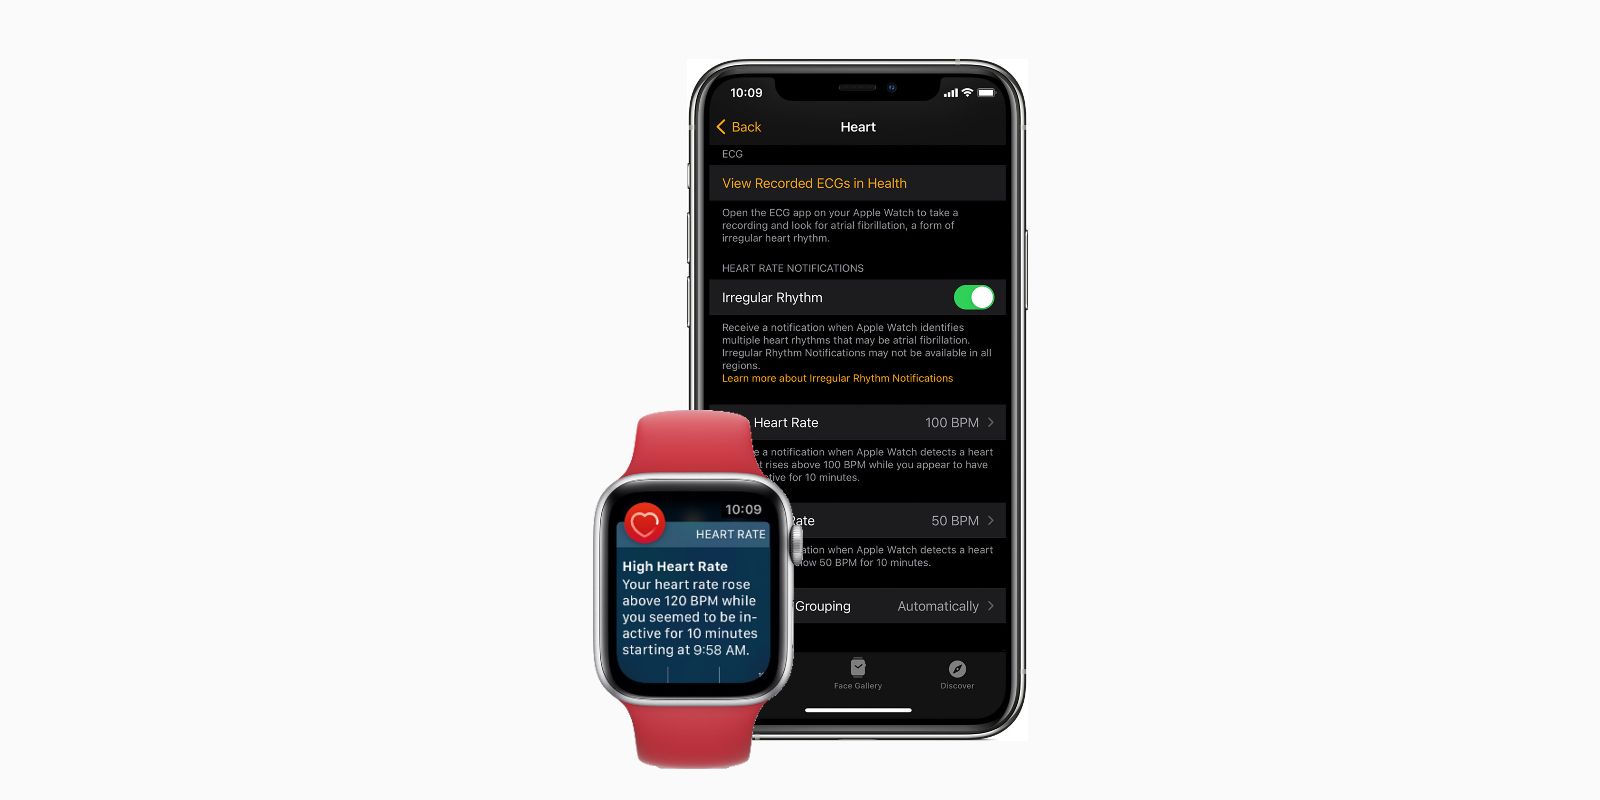 Apple Watch heart notification and setup screen on iPhone